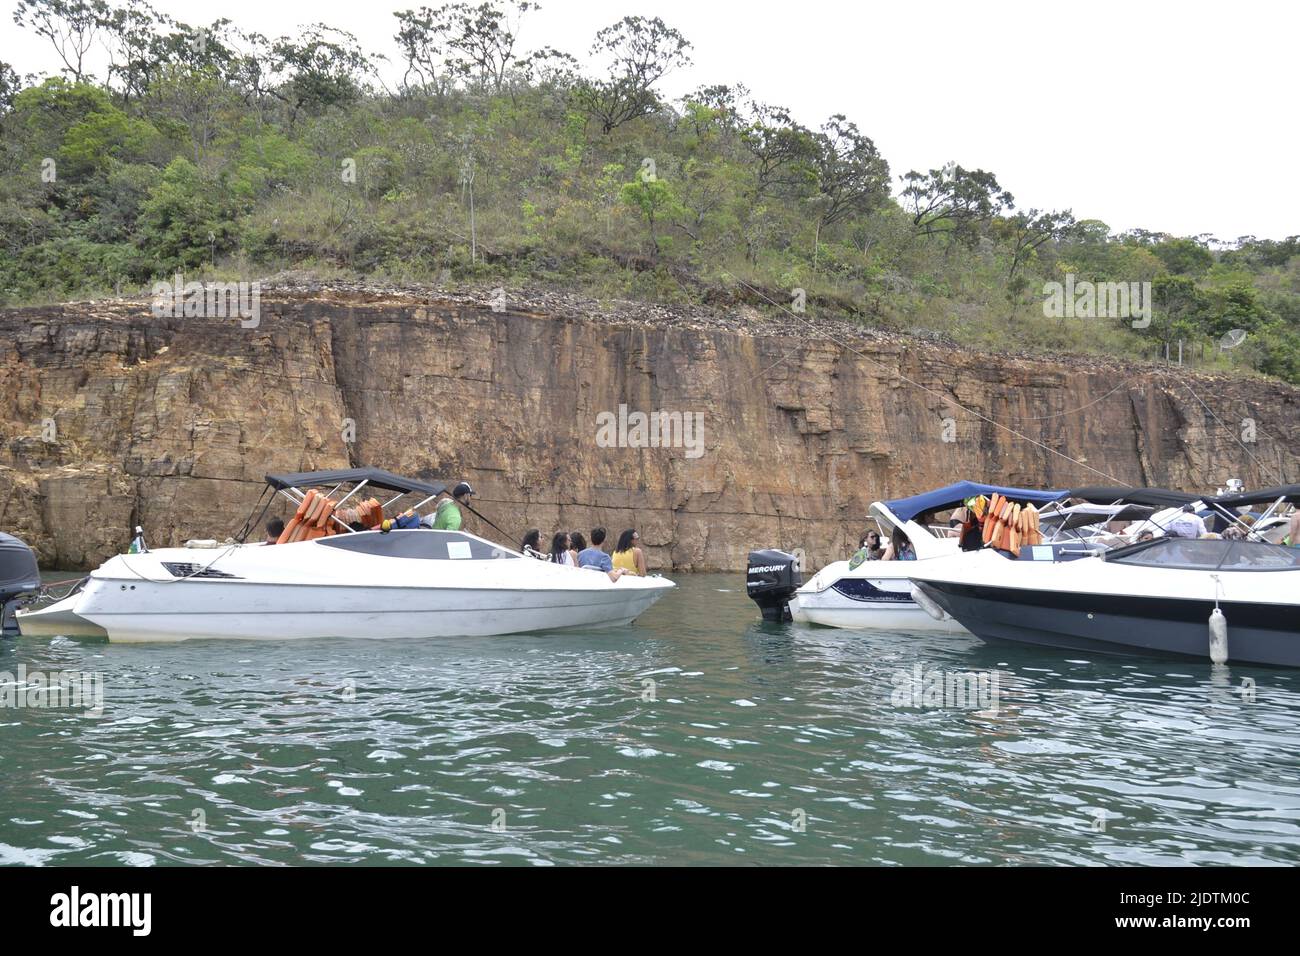 Tourists on a speedboat ride, in the background rocky walls and above trees and green vegetation, with several boats anchored, Brazil, South America, Stock Photo